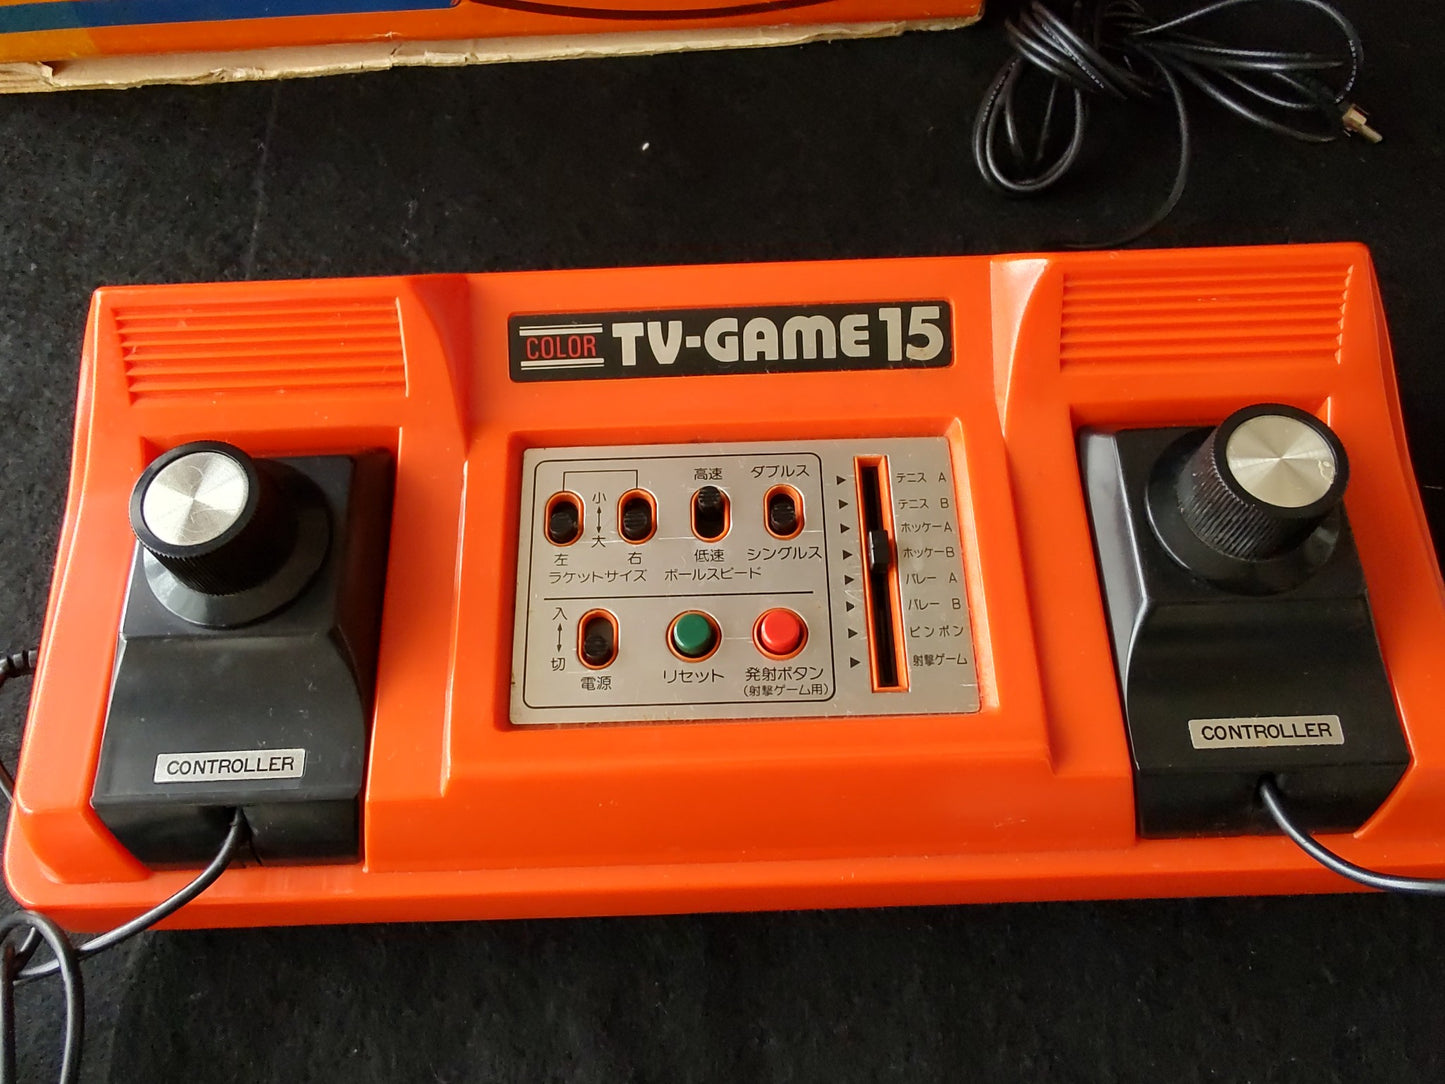 Nintendo TV GAME 15 (CTG-15V) console system, PSU and Box set. Working-f1008-